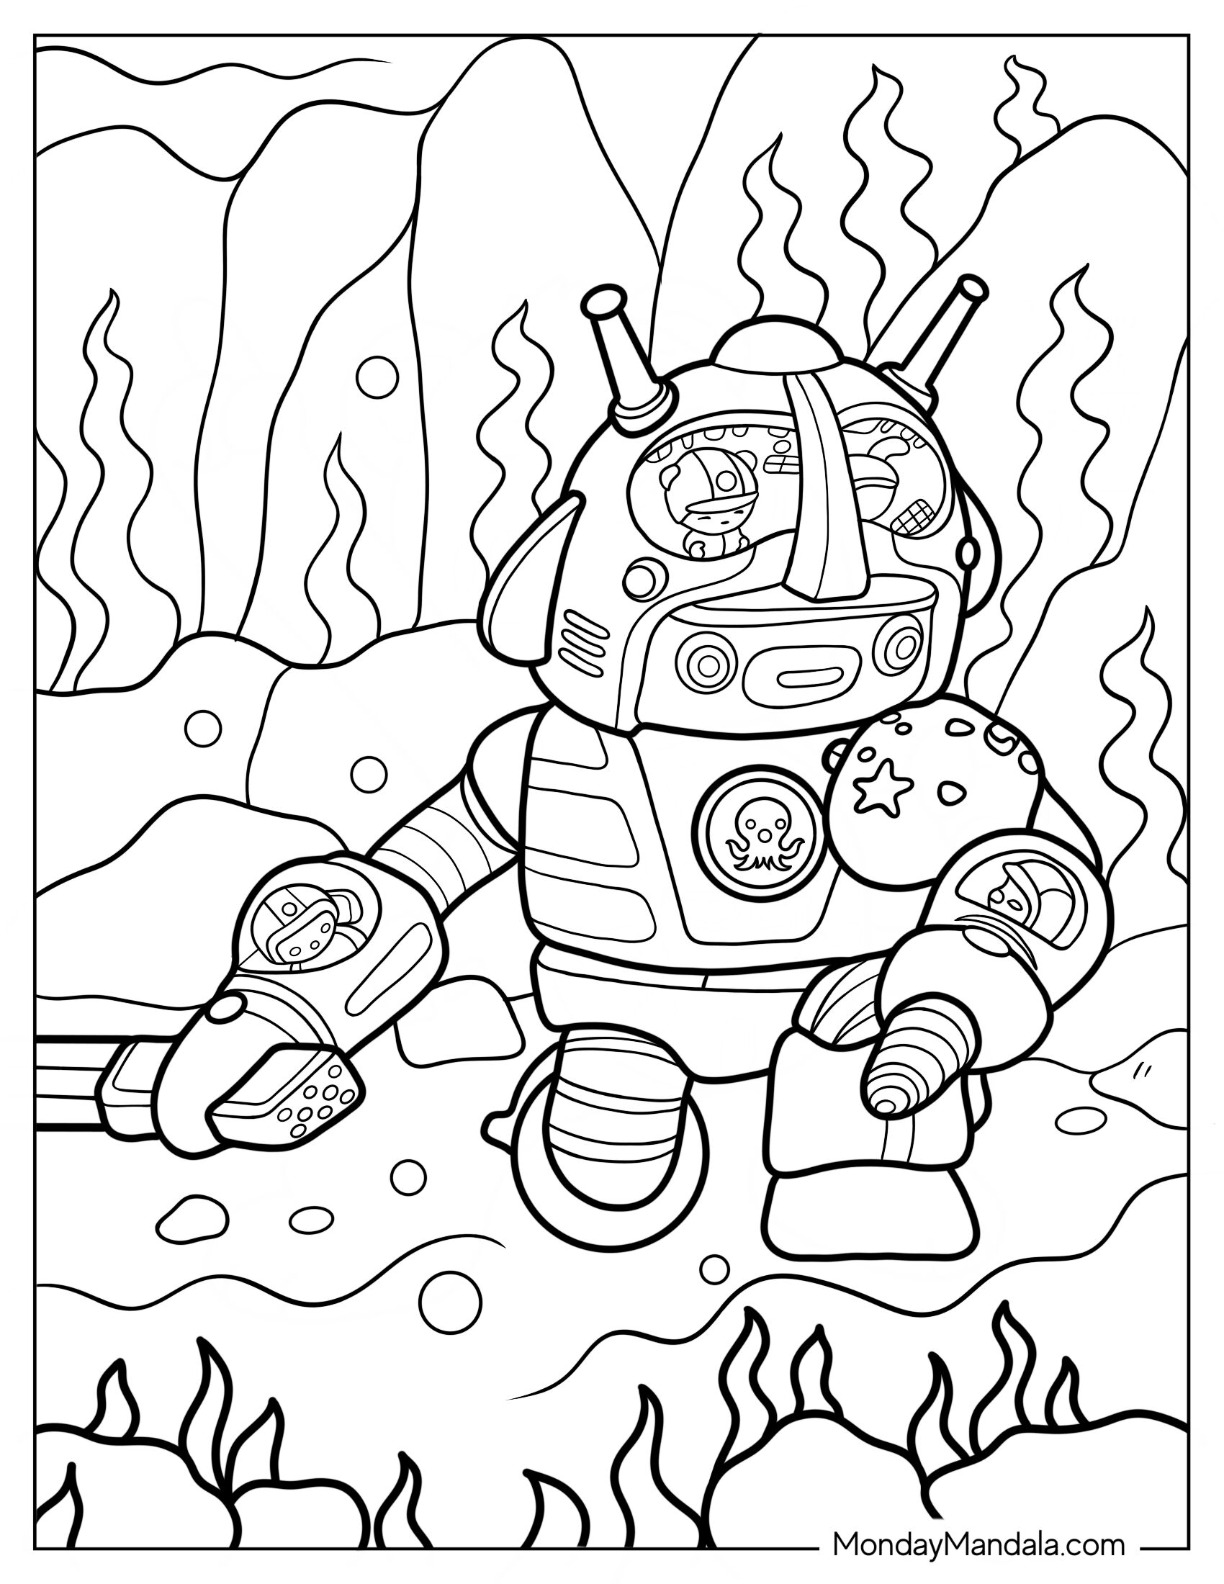 Octonauts coloring pages free pdf printables